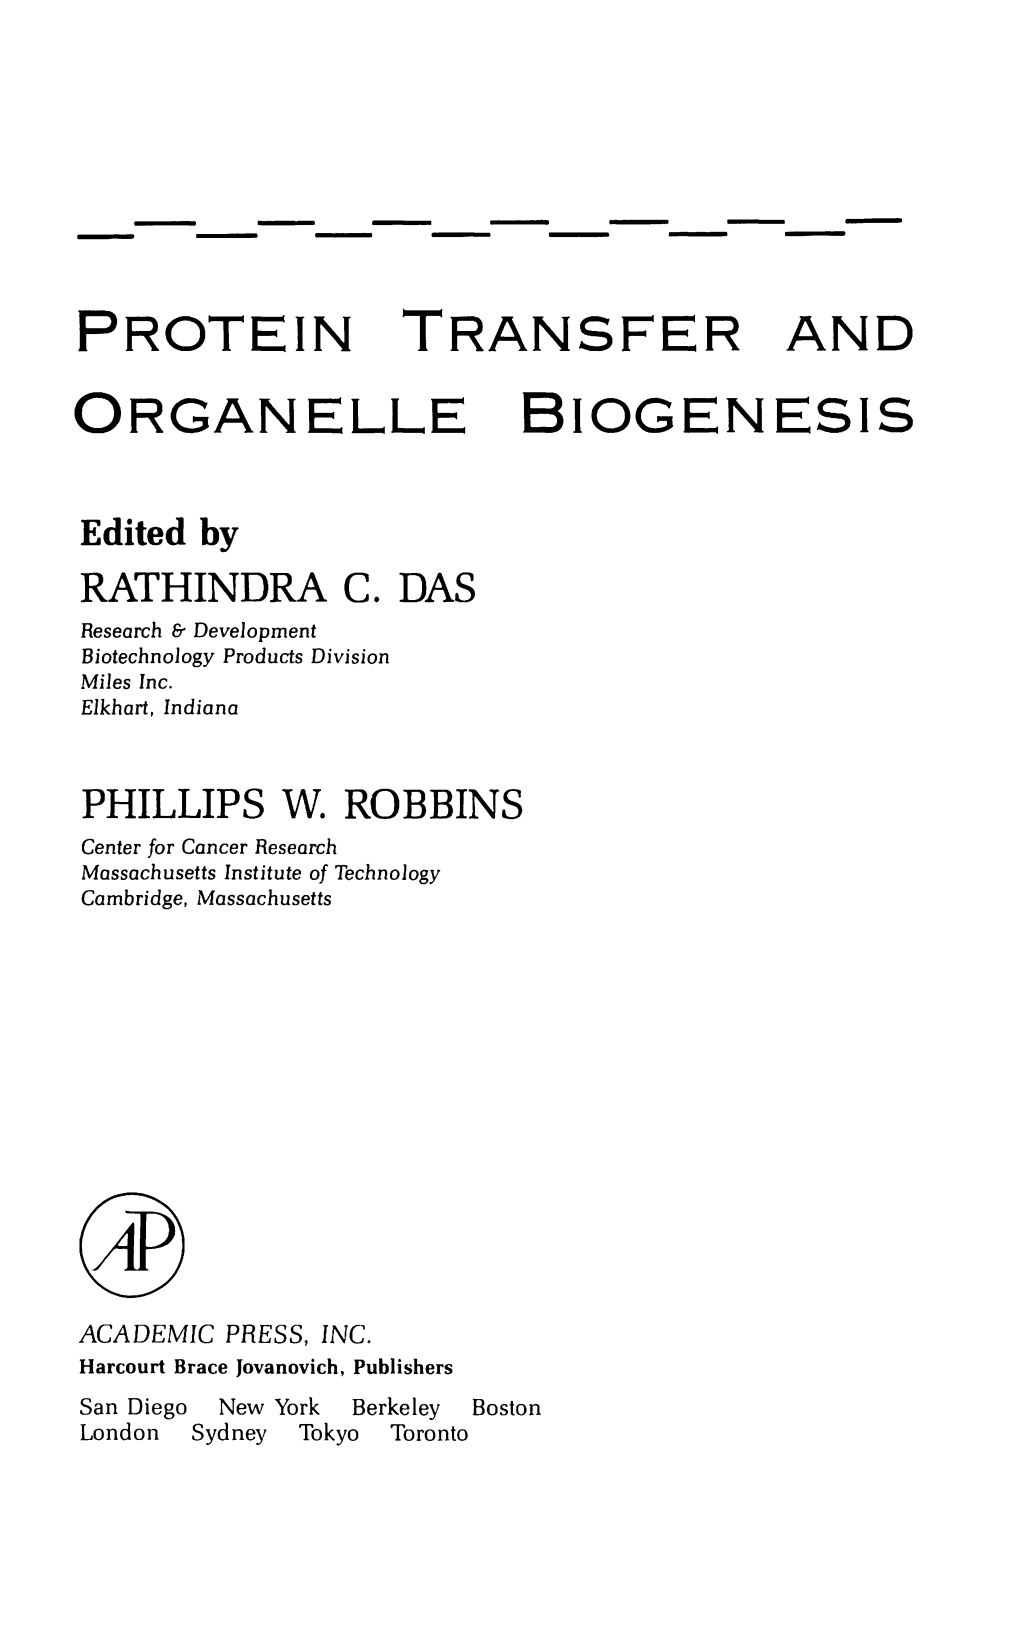 Synthesis and Assembly of Mitochondrial Proteins